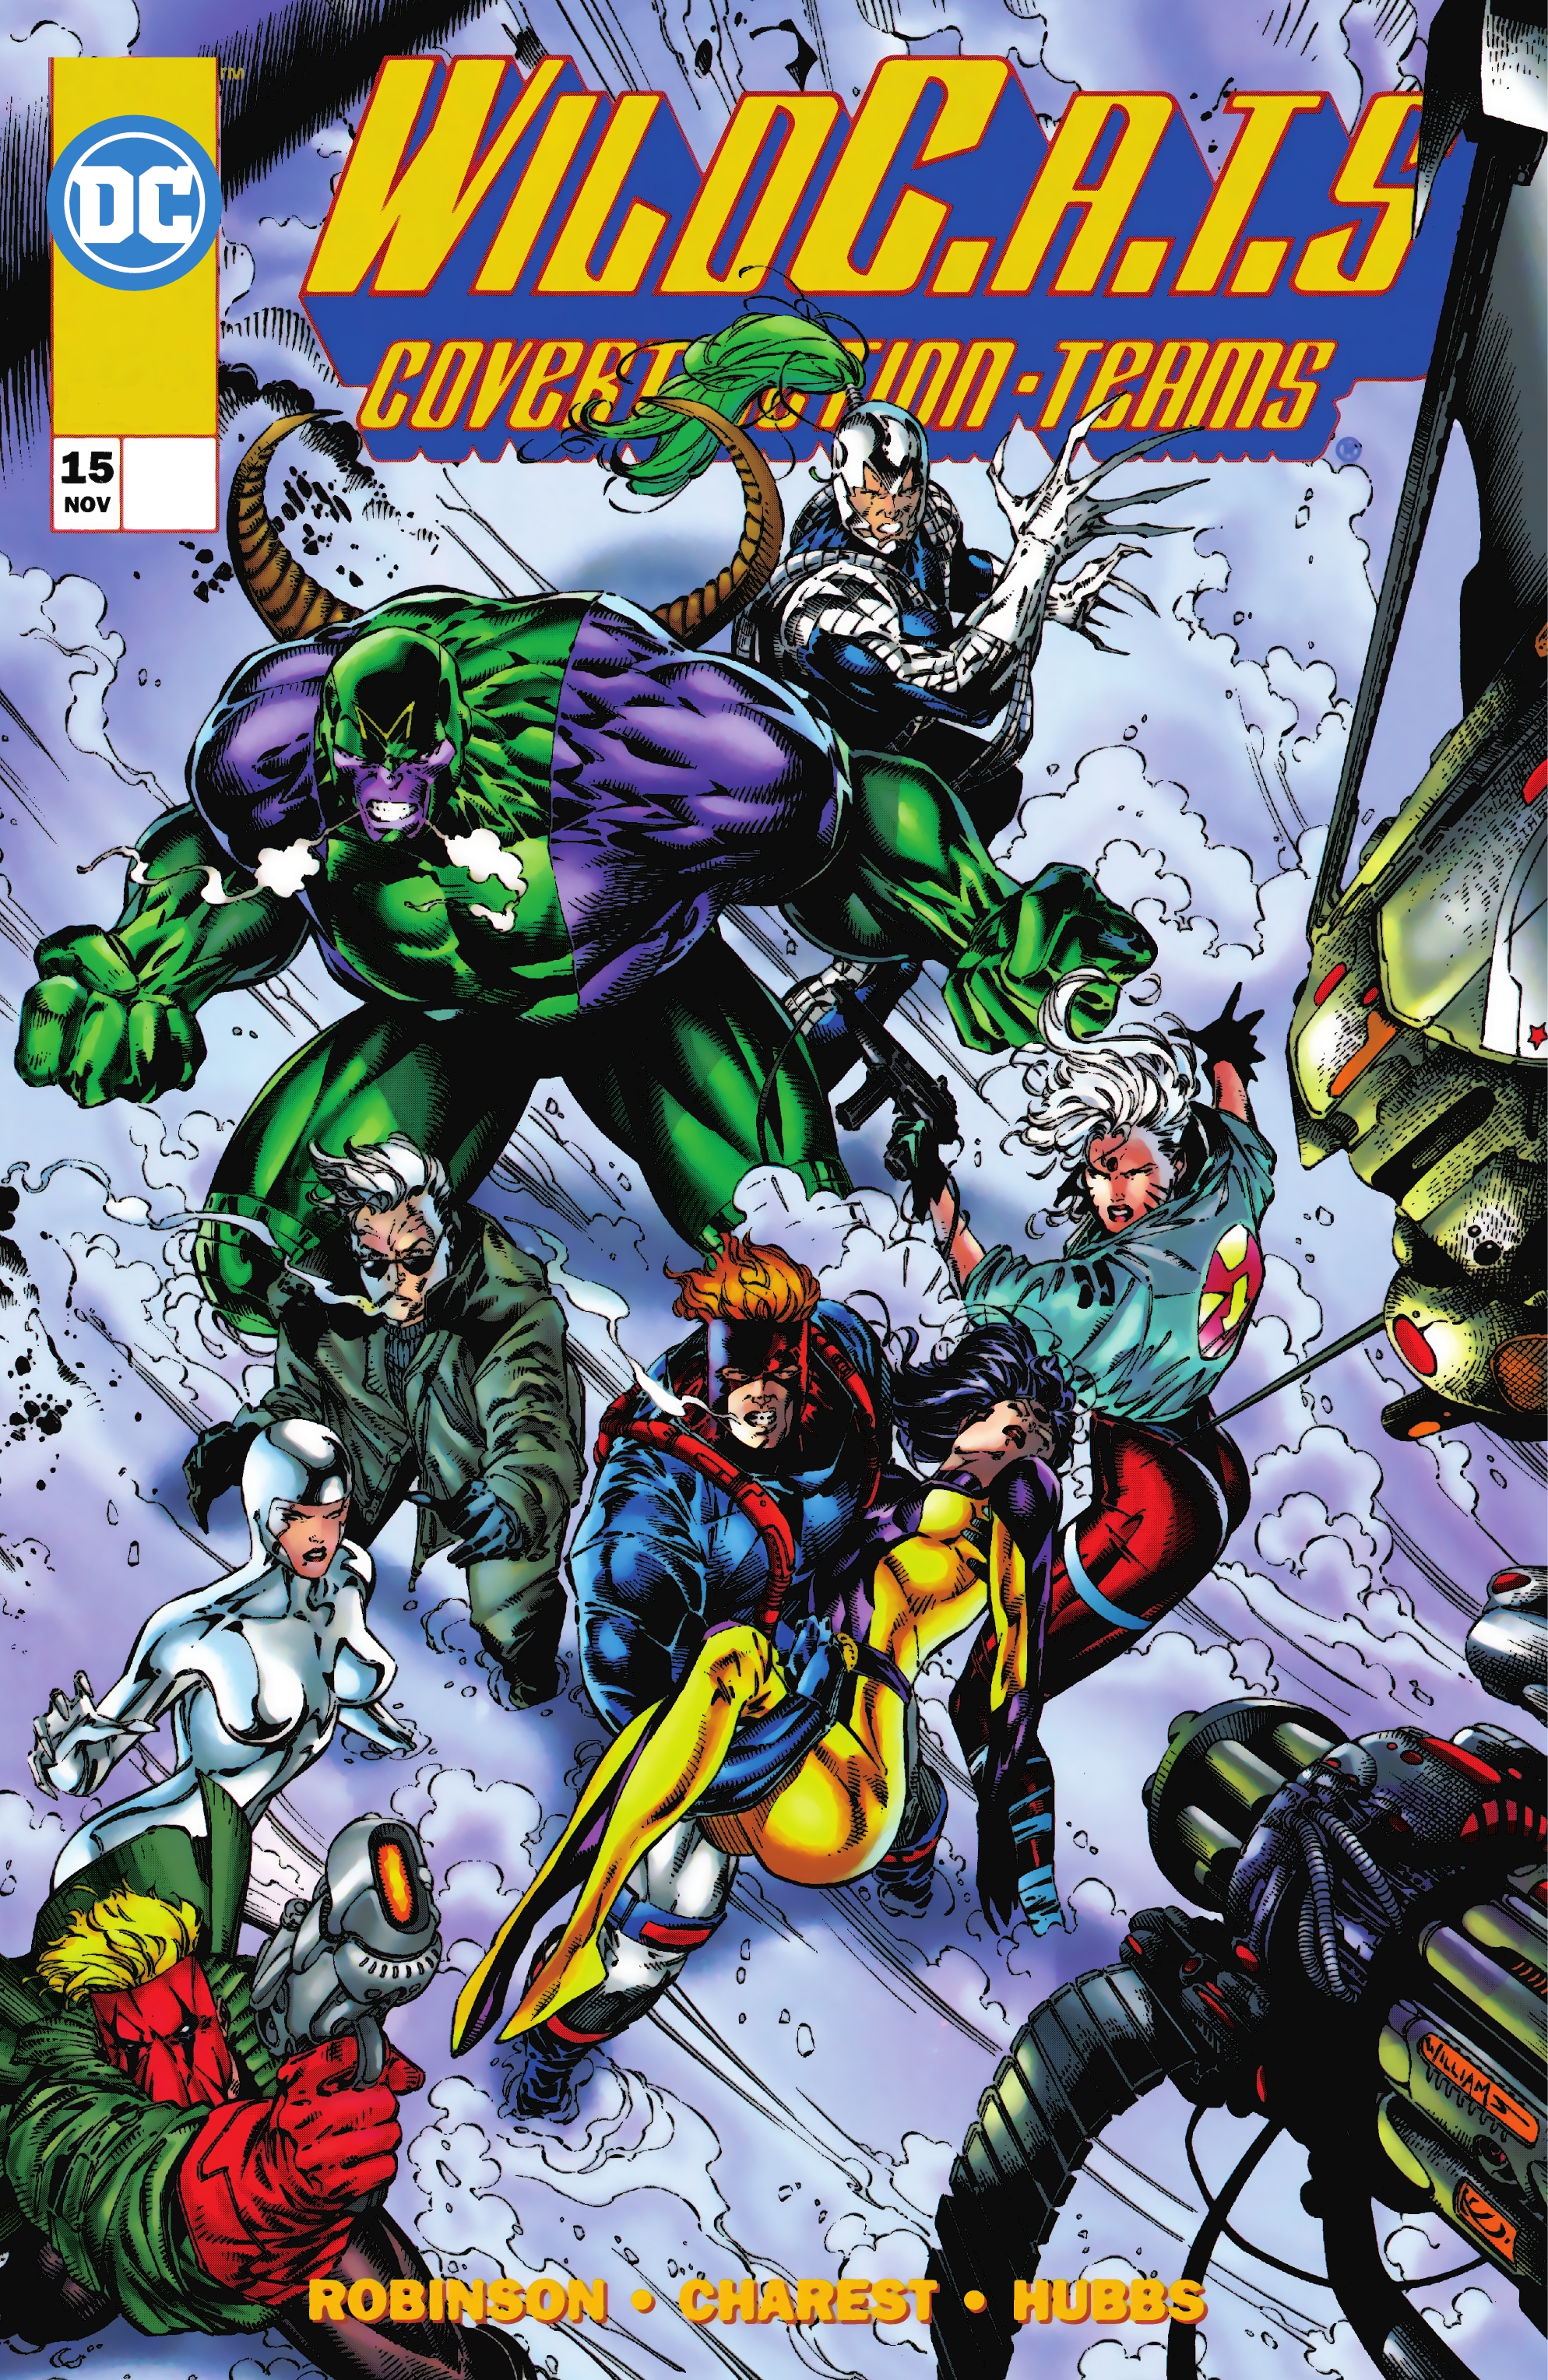 Read online WildC.A.T.s: Covert Action Teams comic -  Issue #15 - 1